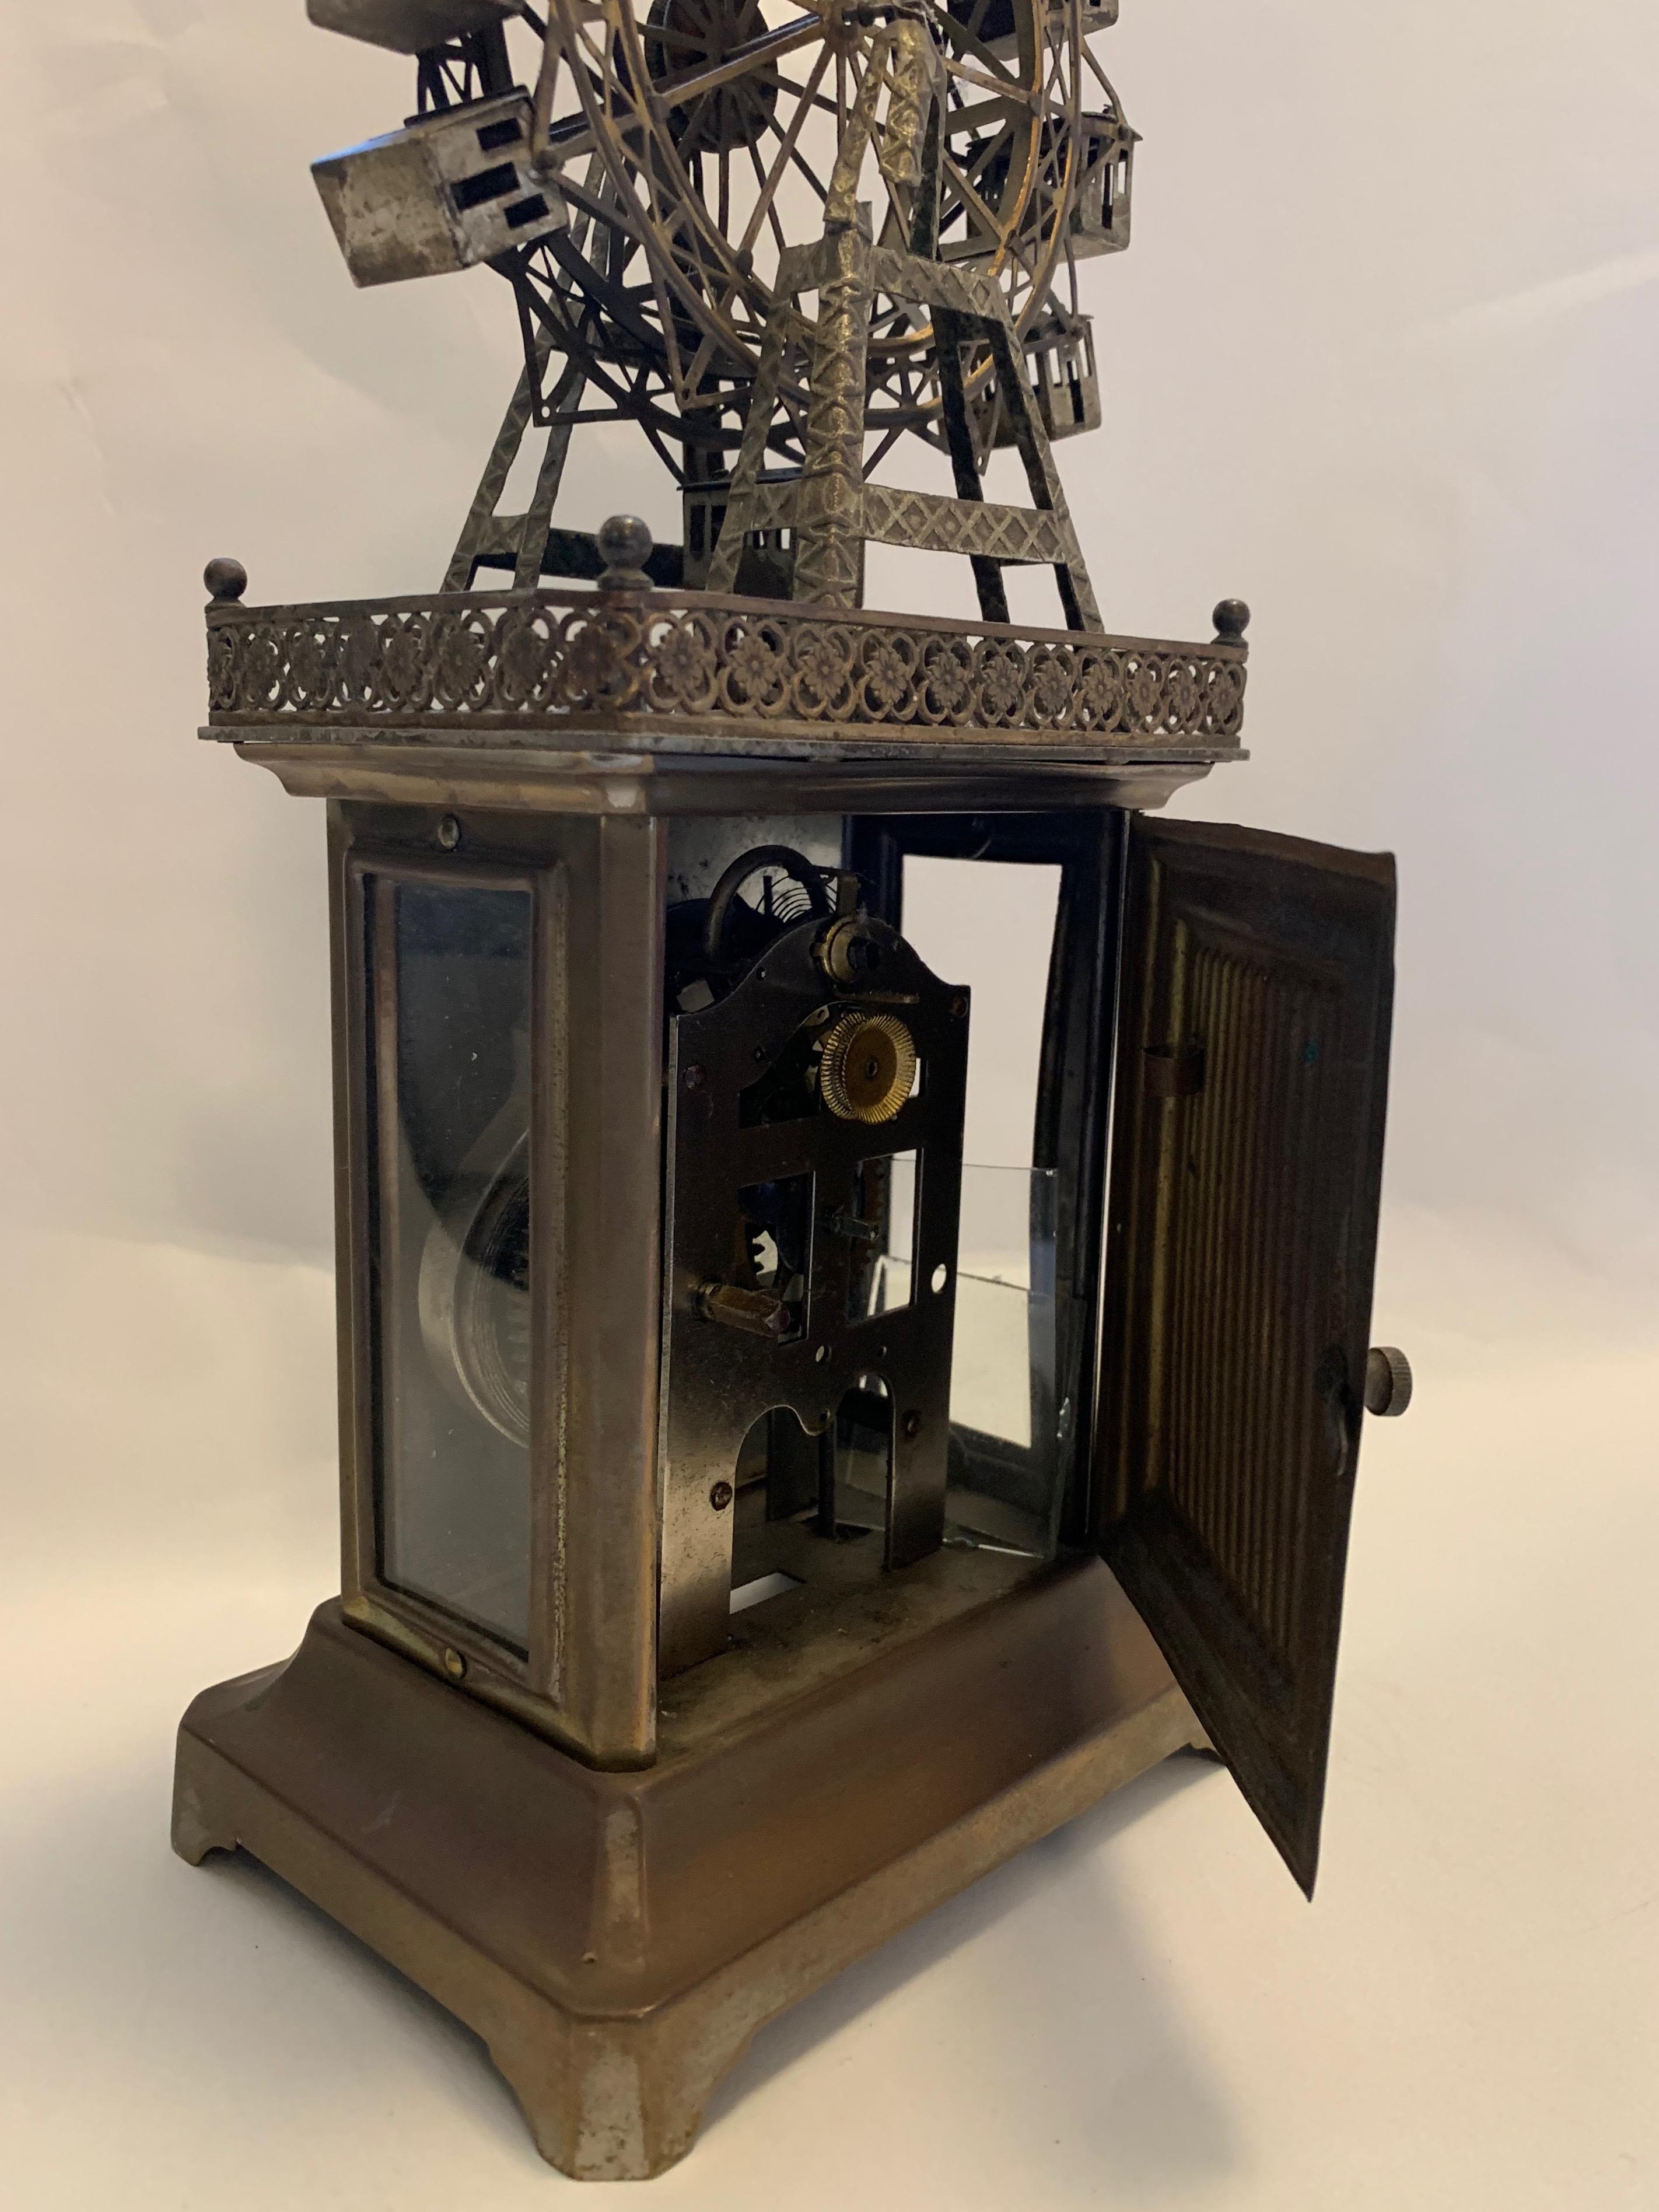 20th Century German Ferris Wheel Novelty Automaton Brass Carriage Clock In Distressed Condition For Sale In London, Nottinghill